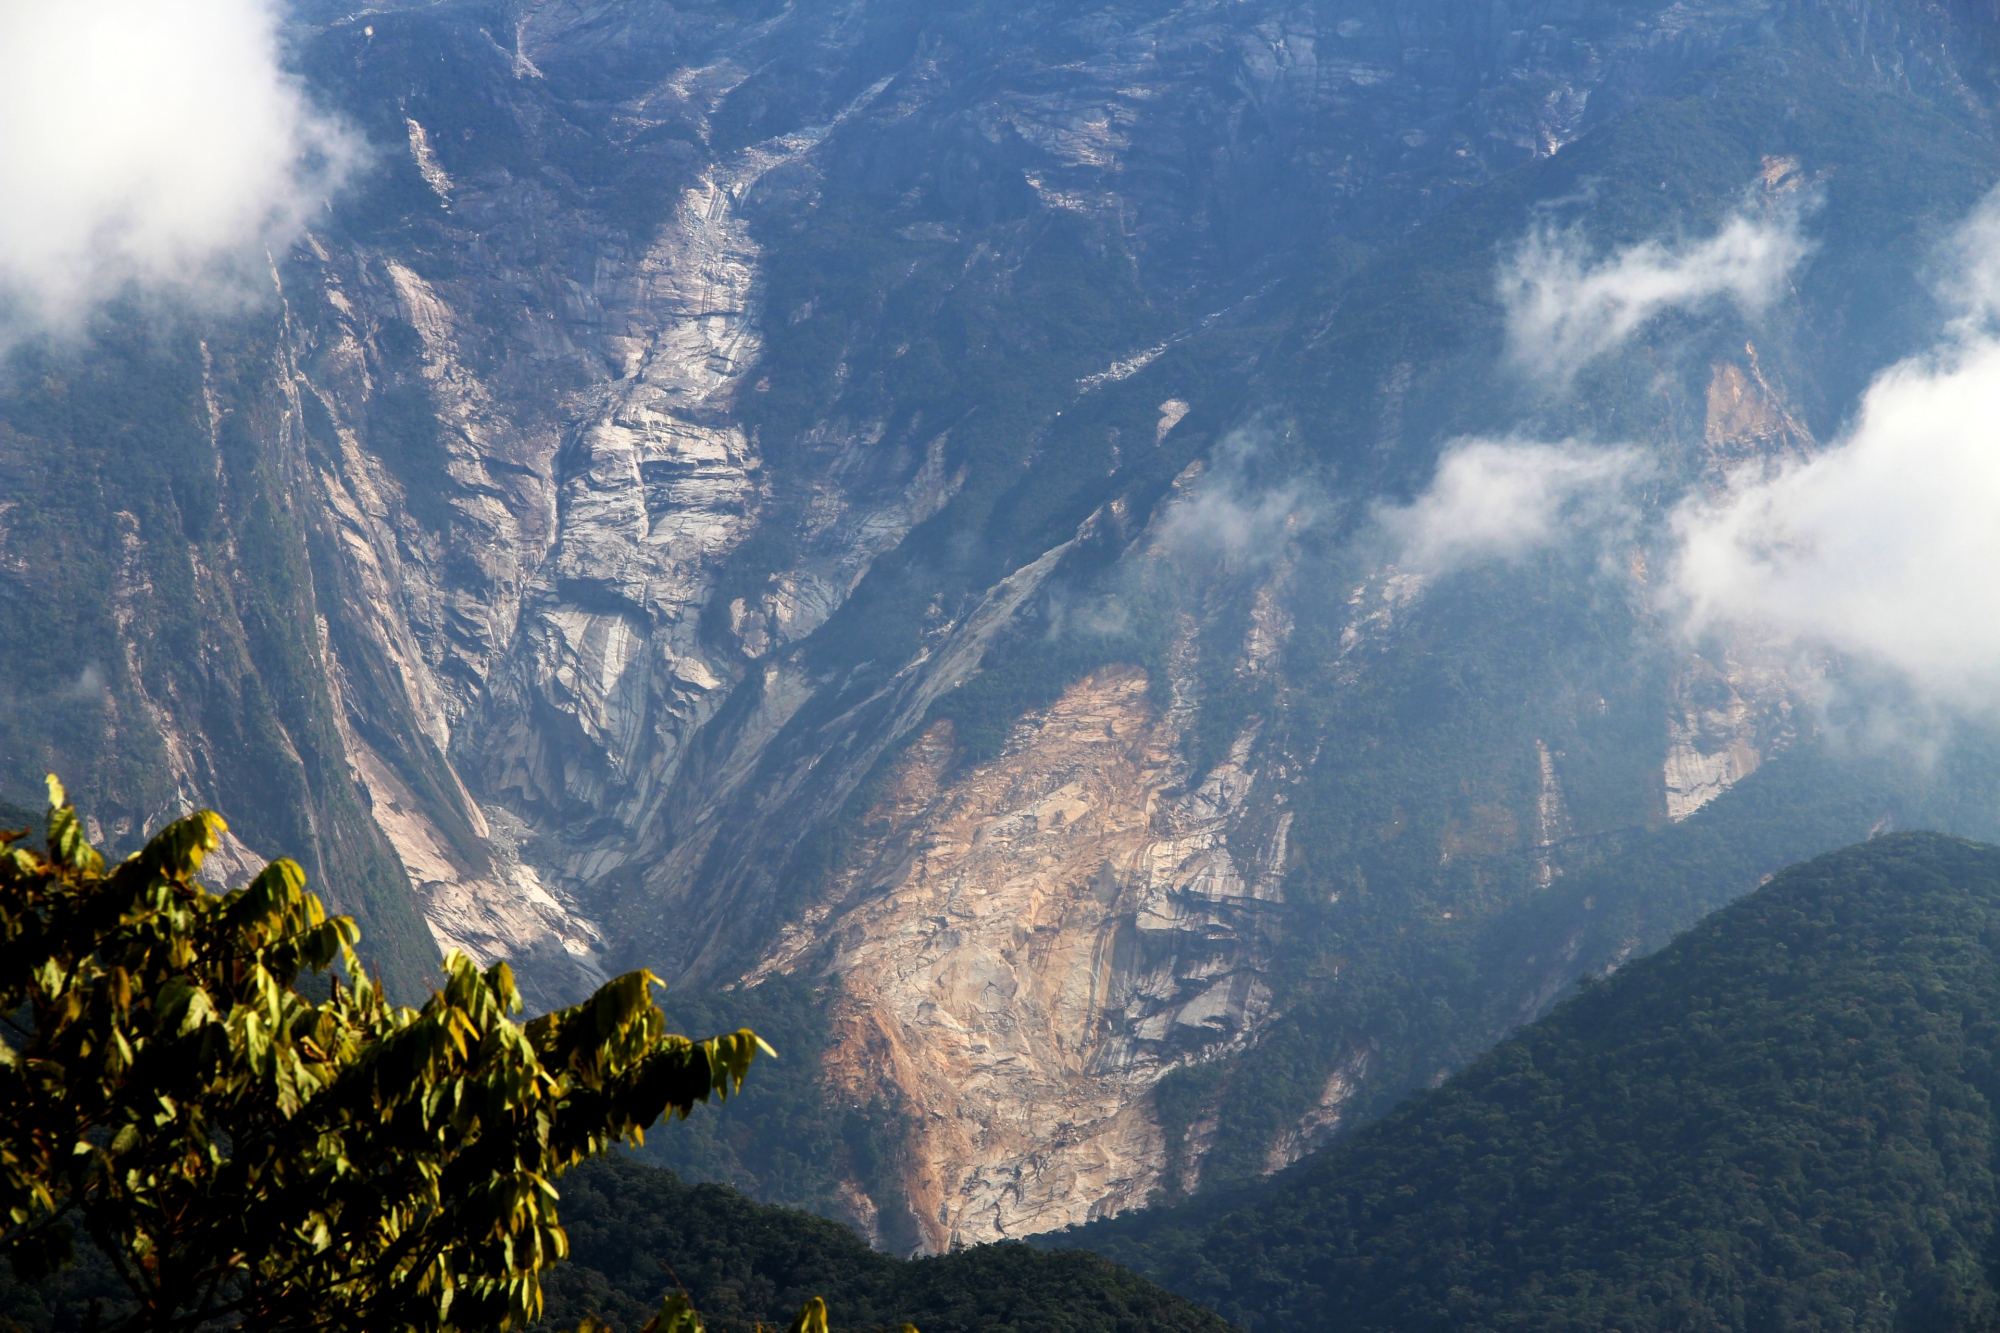 A closer look at a landslide on Mount Kinabalu in Sabah, Malaysia (Source: Yvonne Soon)